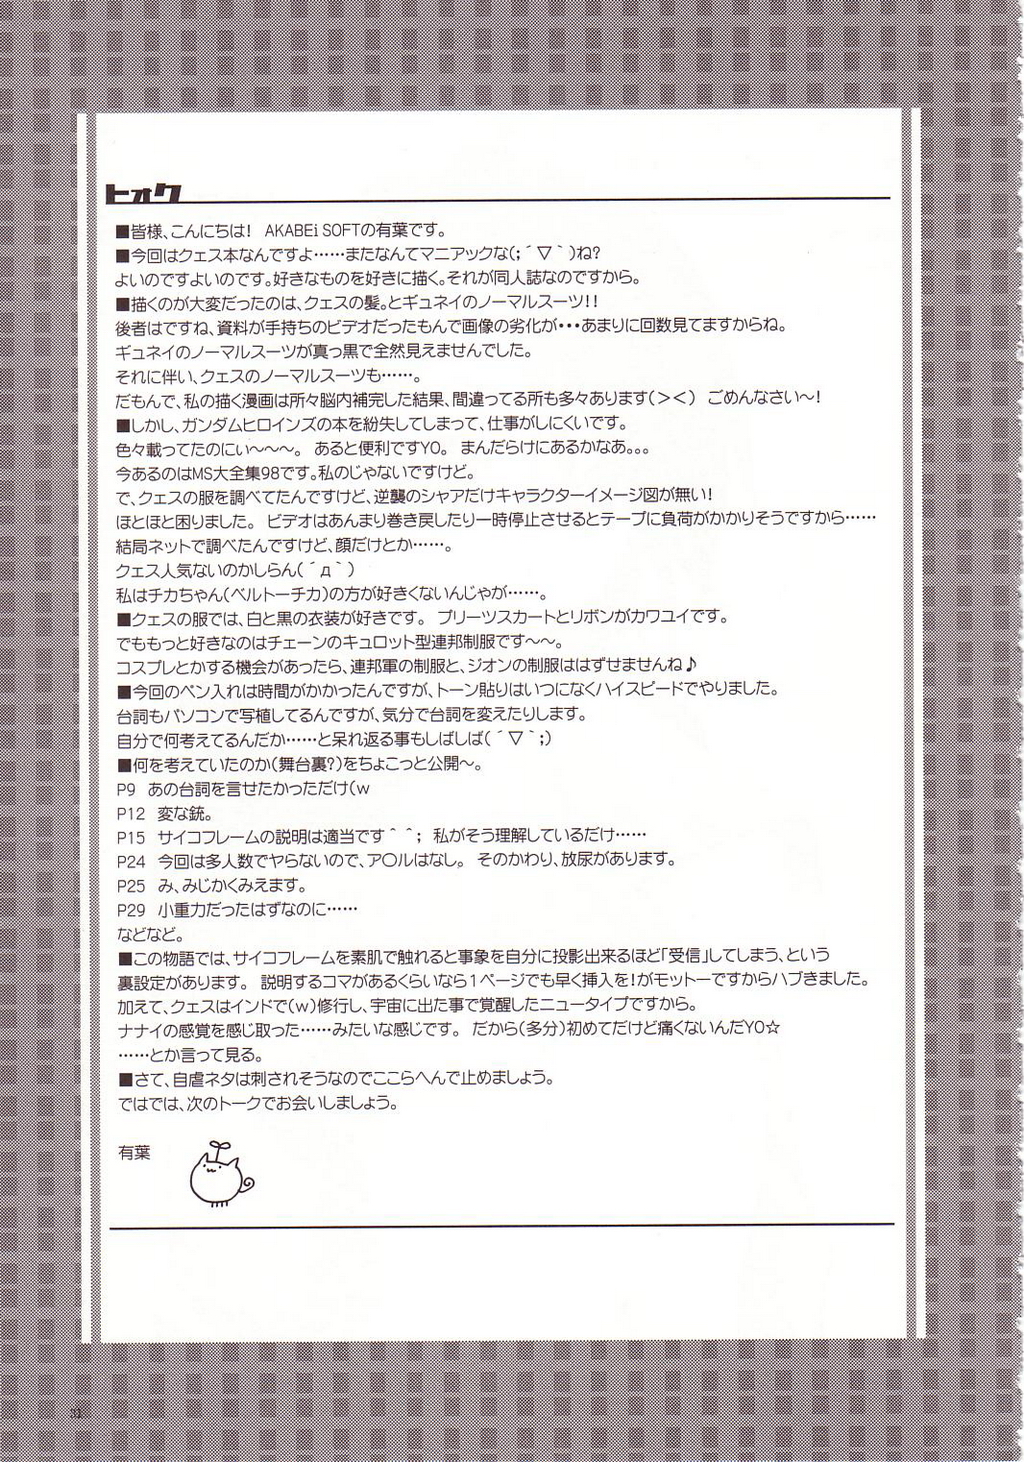 [AKABEi SOFT (Alpha)] Aishitai I WANT TO LOVE (Mobile Suit Gundam Char's Counterattack) page 30 full